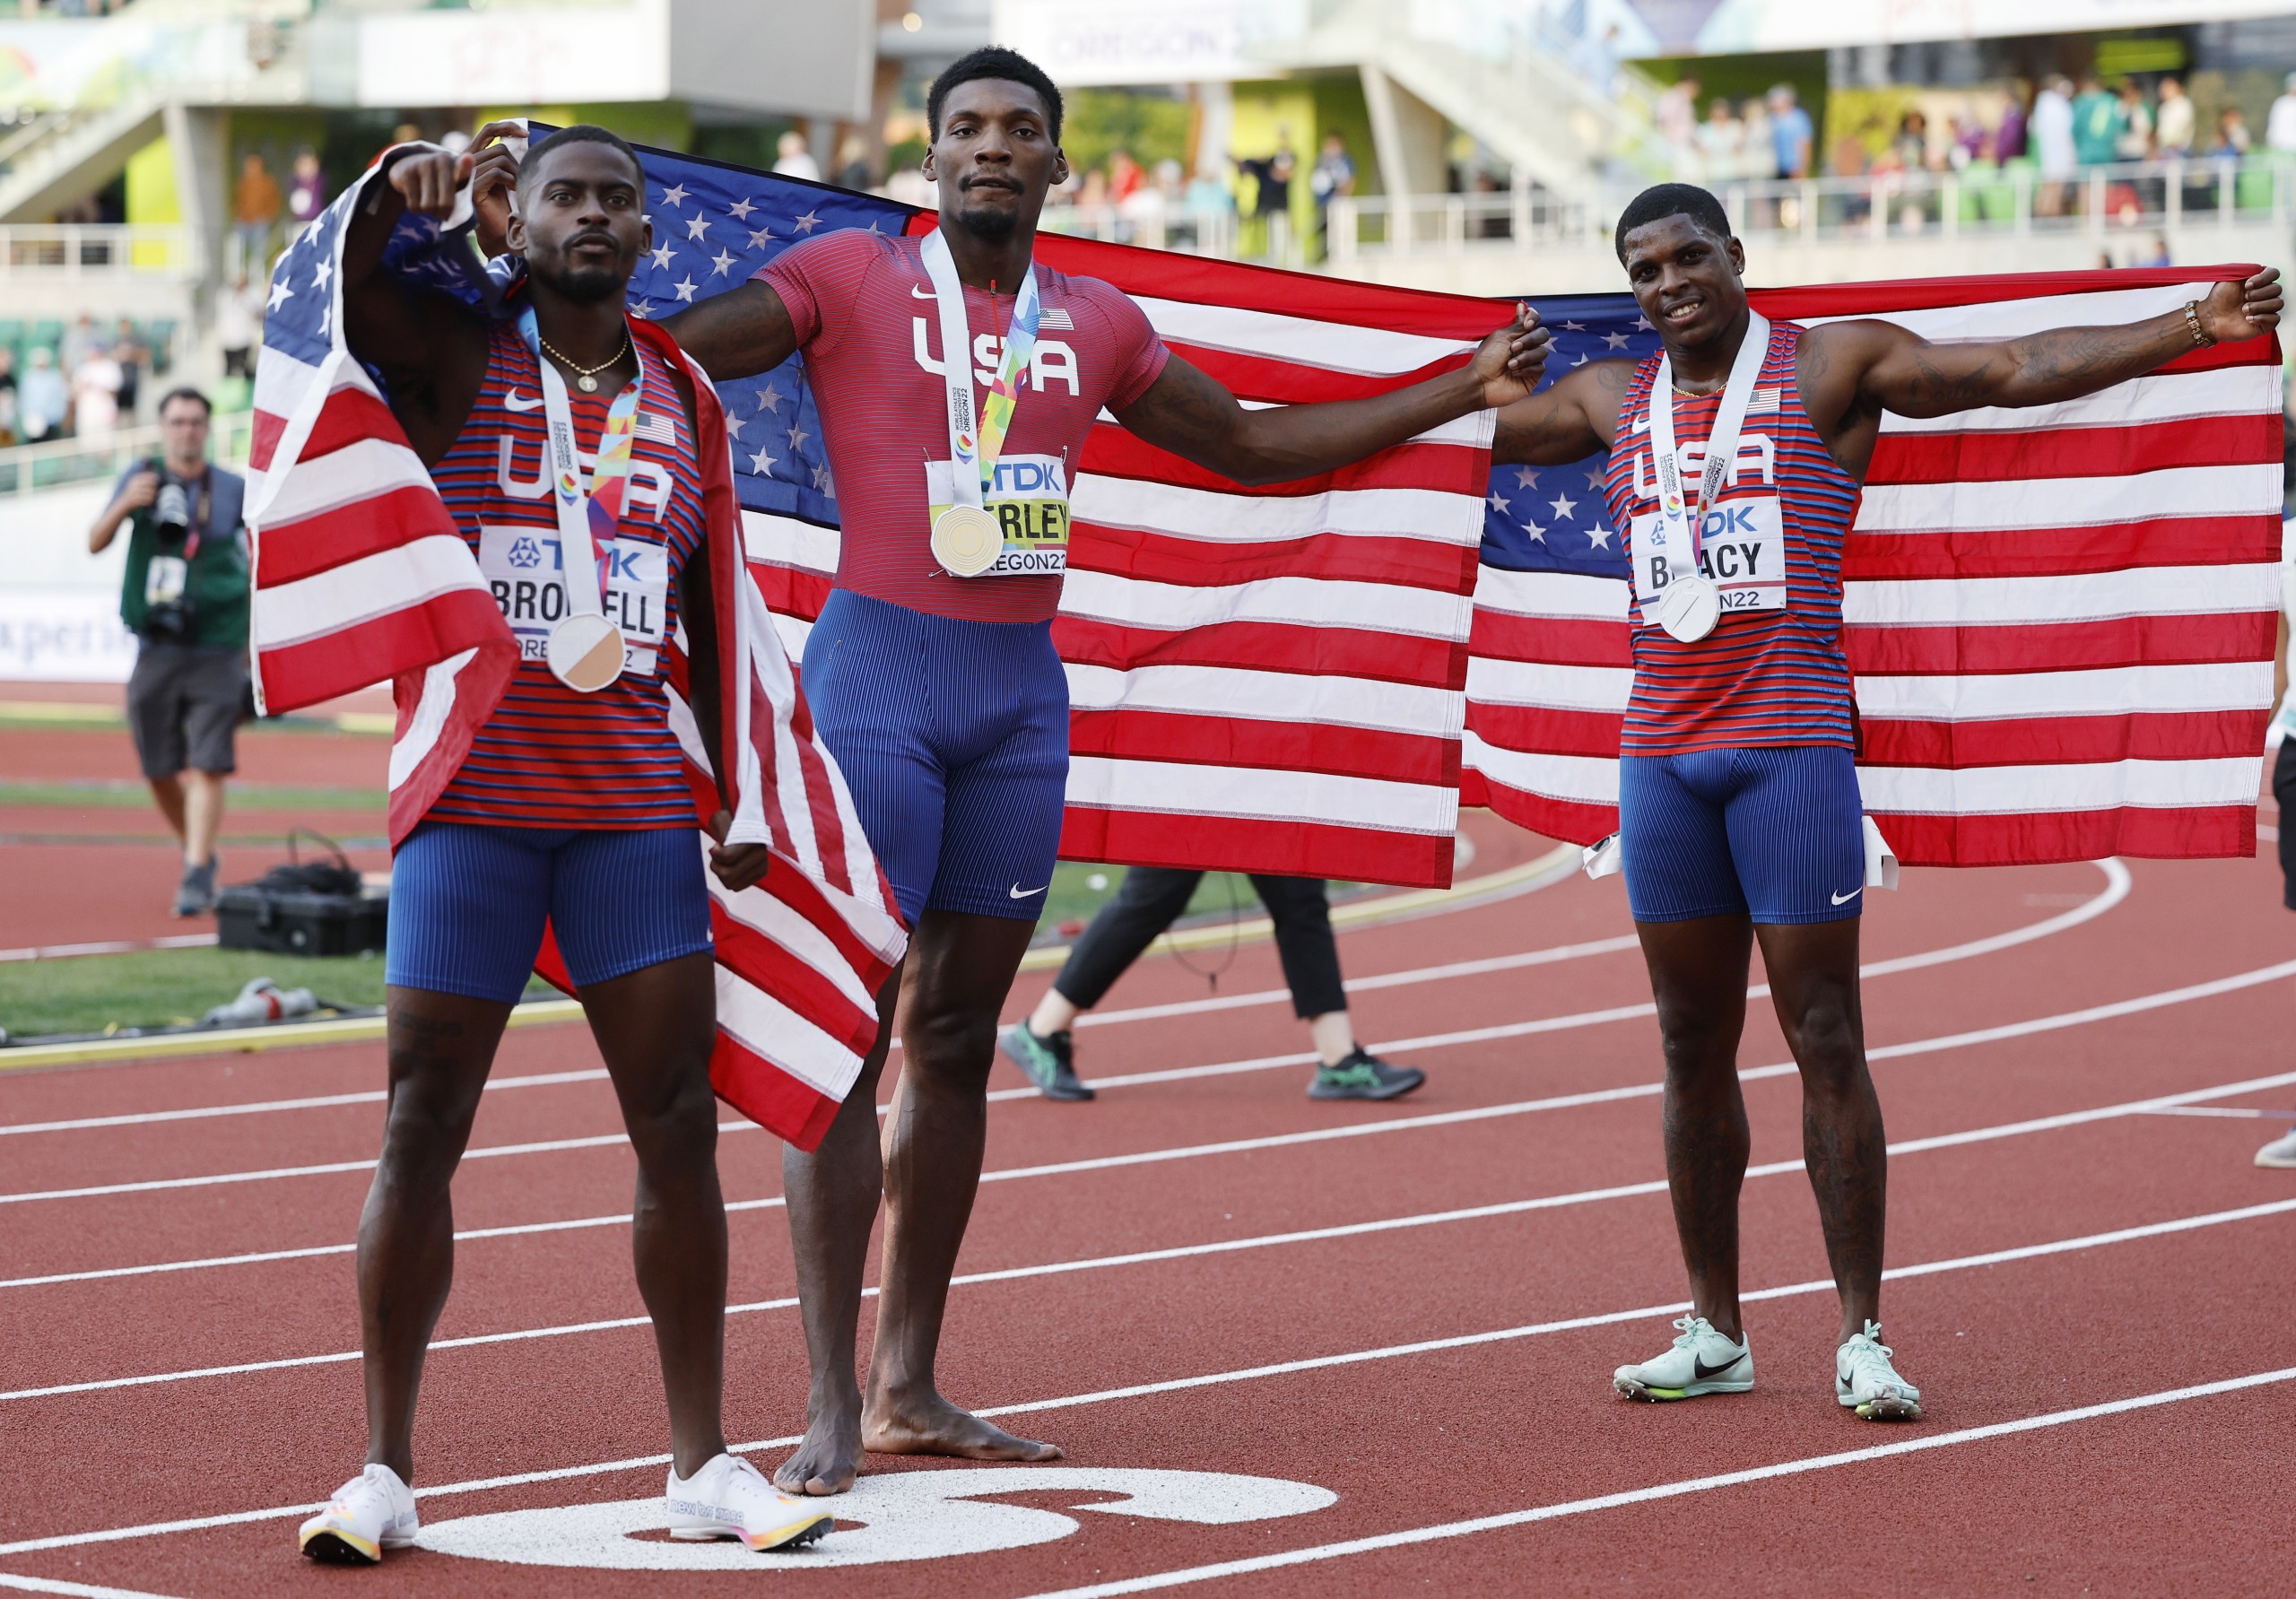 epa10075583 Winner Fred Kerley (C) of the US, second place Marvin Bracy (R) of the US and third placed Trayvon Bromell celebrate after the men's 100m final at the World Athletics Championships Oregon22 at Hayward Field in Eugene, Oregon, USA, 16 July 2022.  EPA/John G. Mabanglo